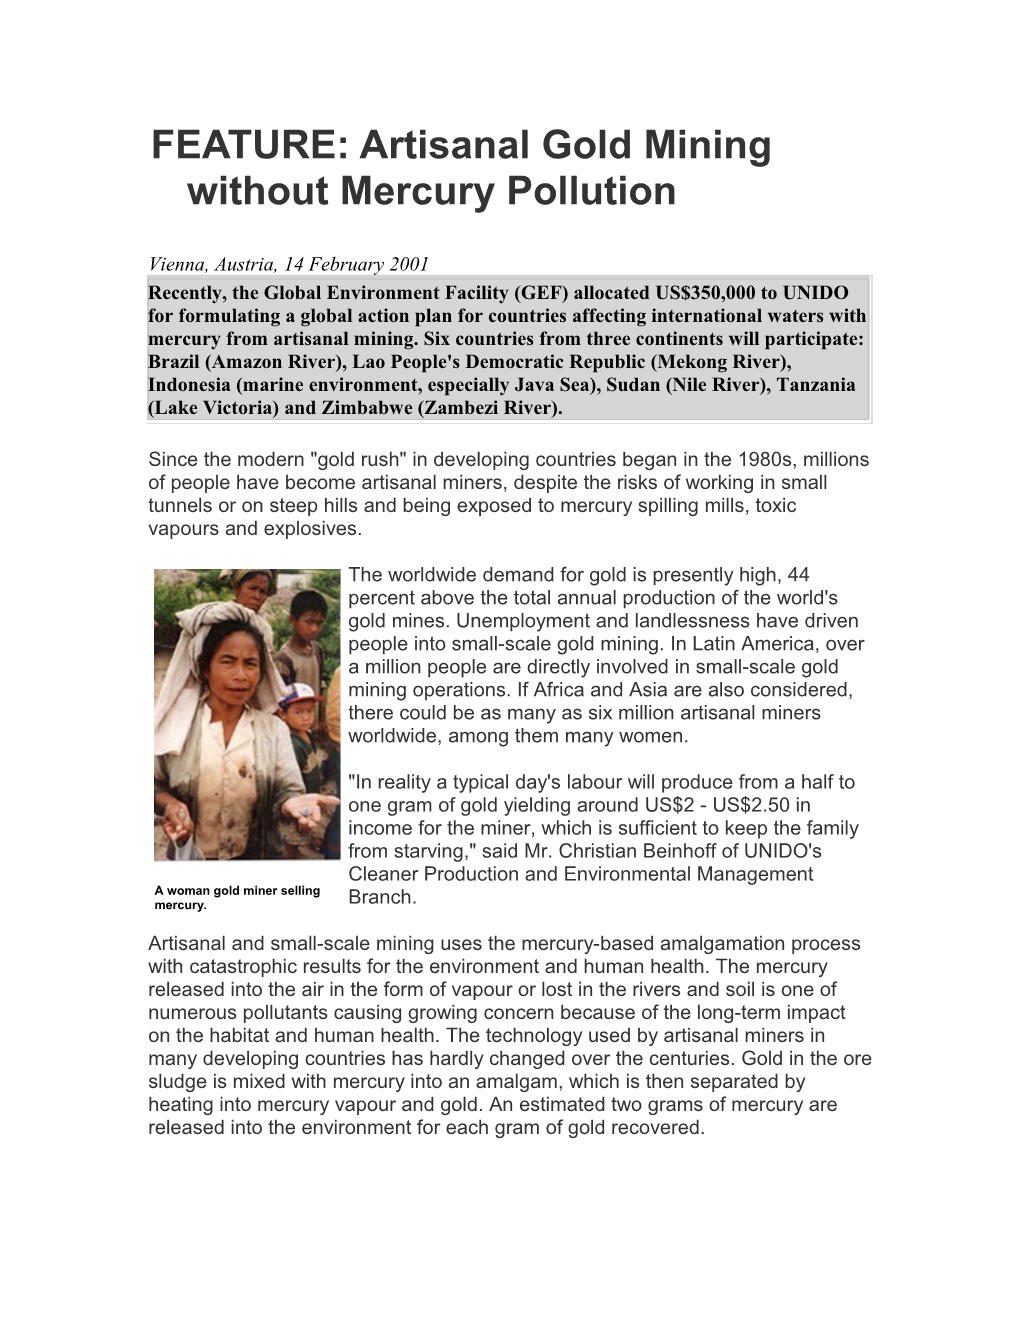 FEATURE: Artisanal Gold Mining Without Mercury Pollution